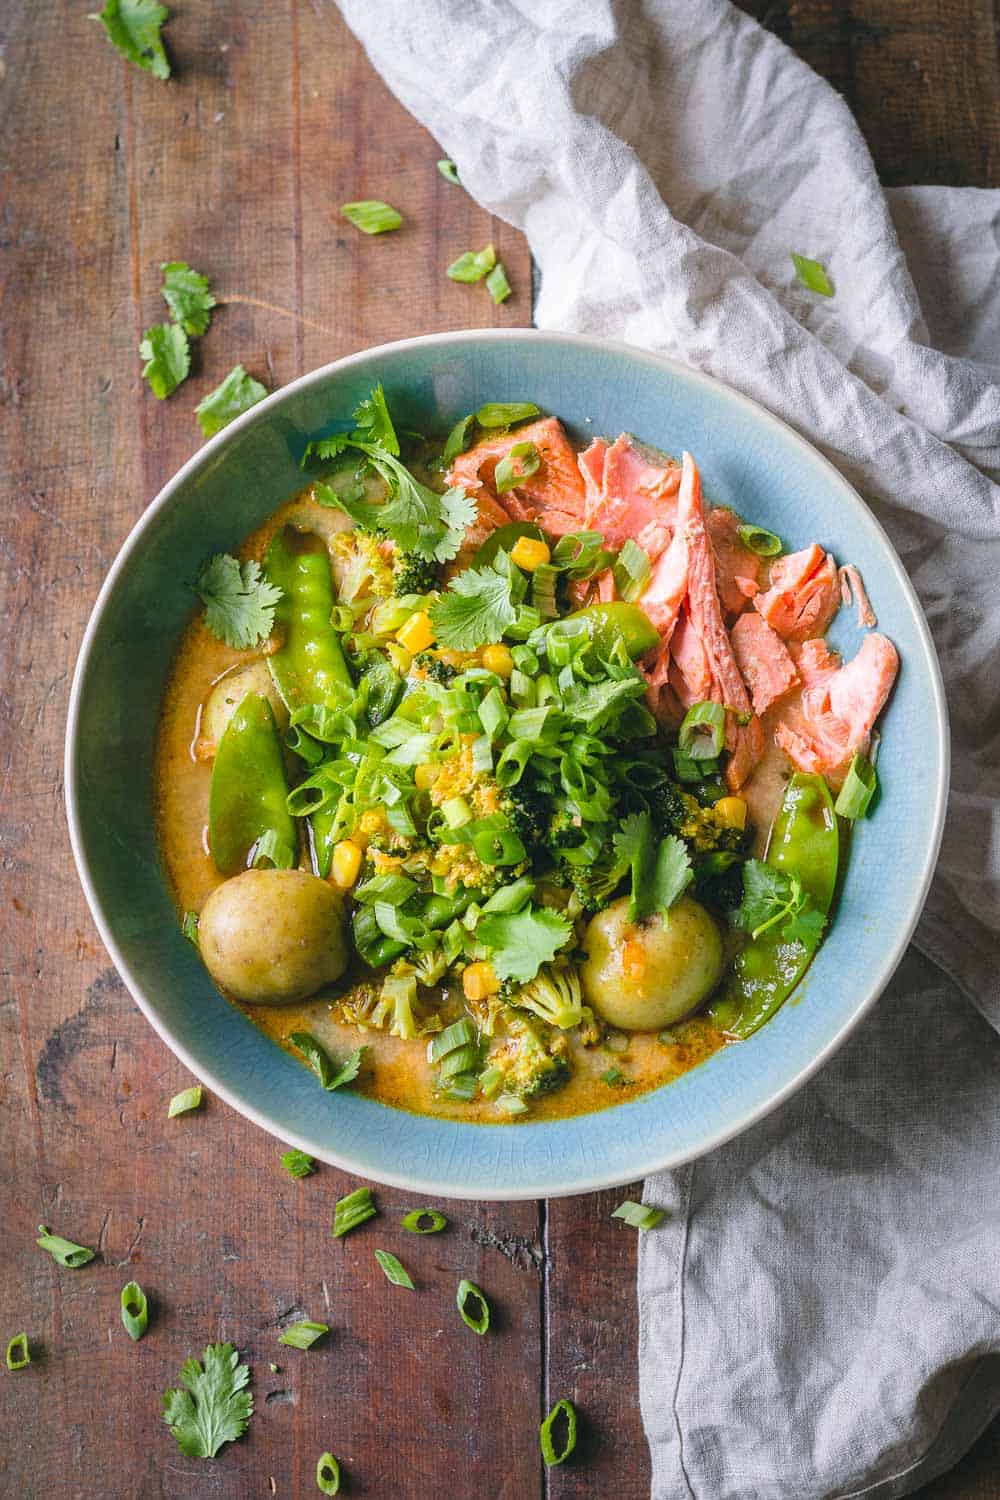 Thai Curry Soup in a blue bowl showing shredded salmon, potatoes, broccoli, and snow peas in broth on a wooden table